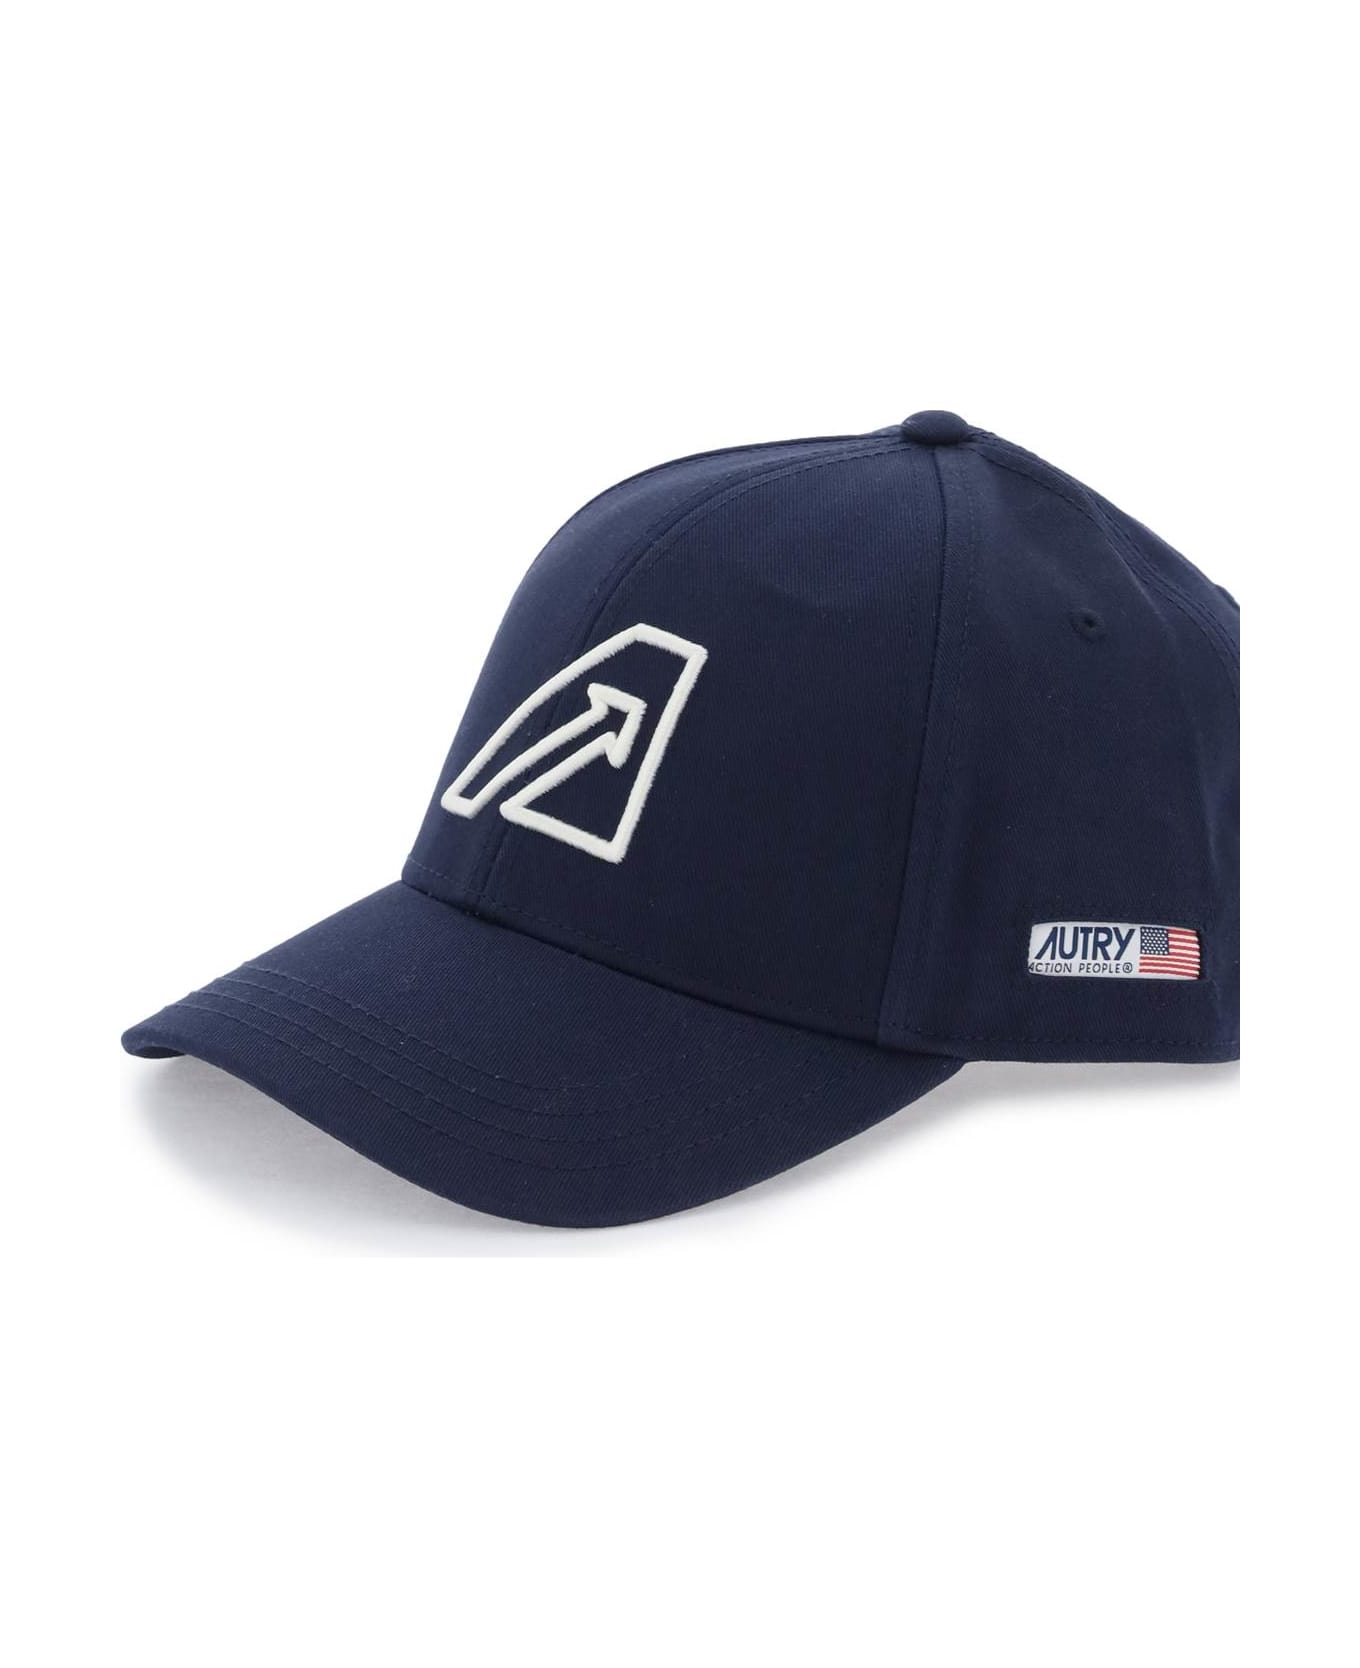 Autry Baseball Cap With Embroidered Logo - Blue patch